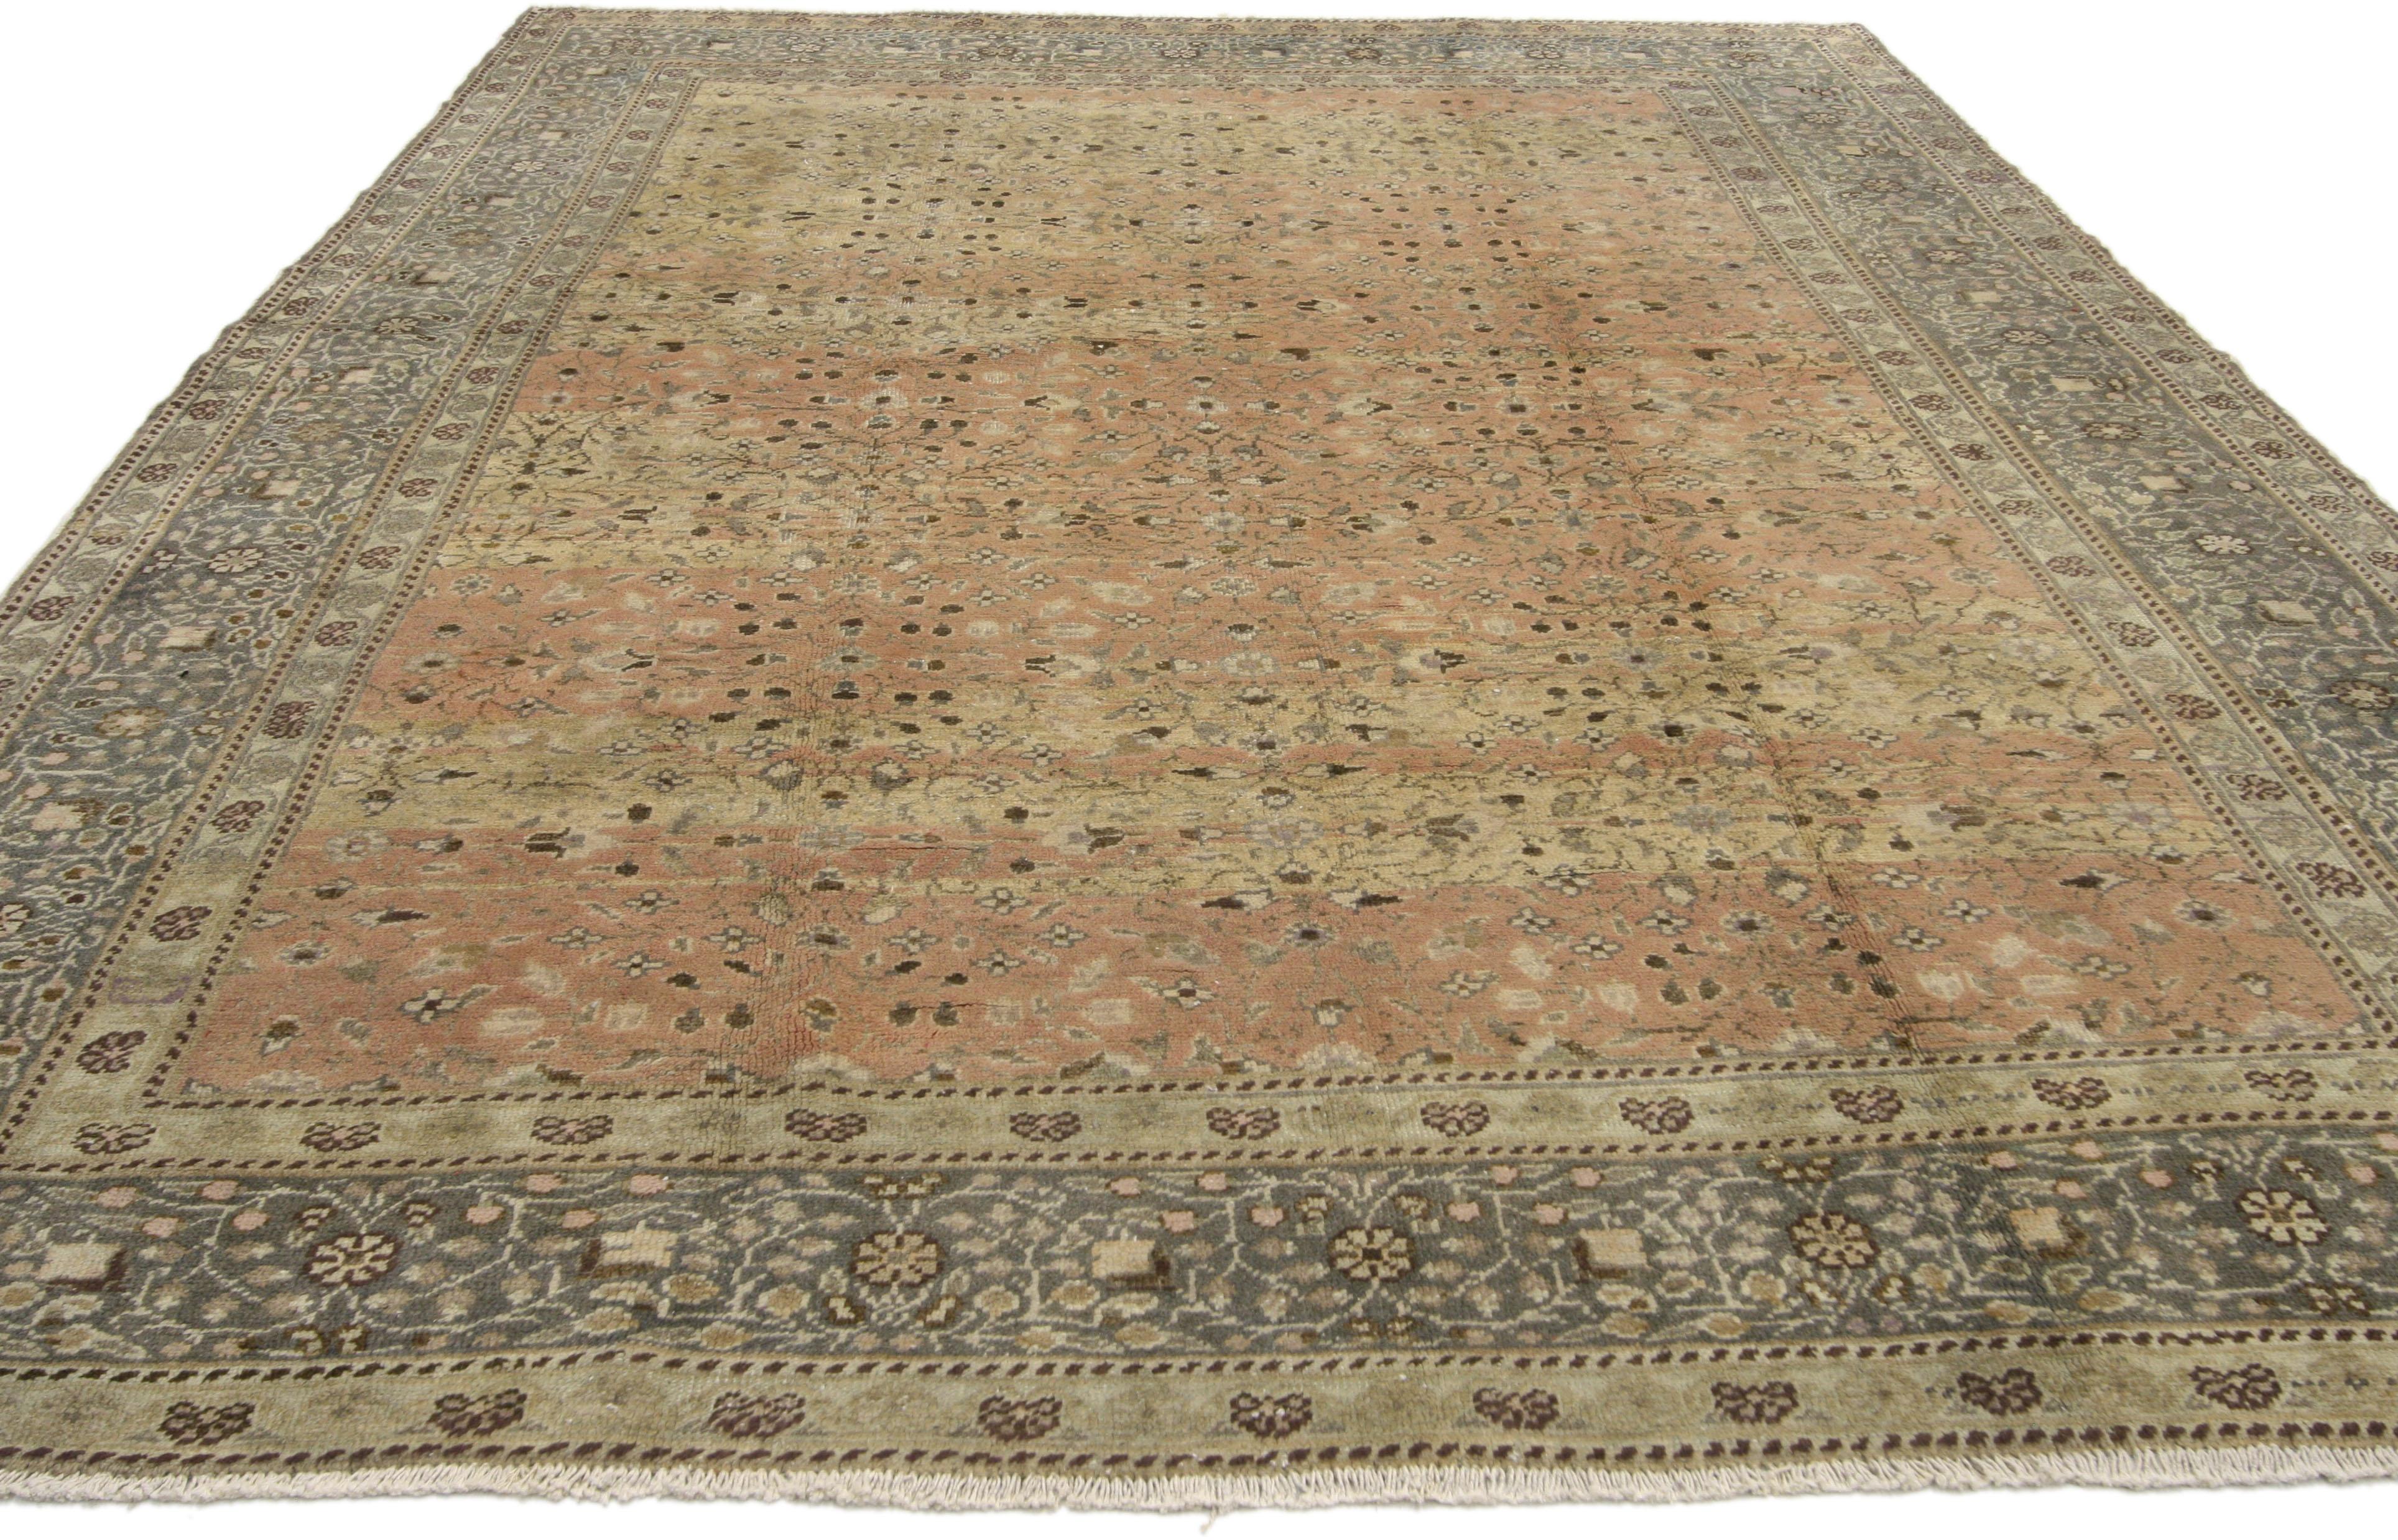 Rustic Distressed Antique Turkish Sivas Rug with Shabby Chic Farmhouse Style For Sale